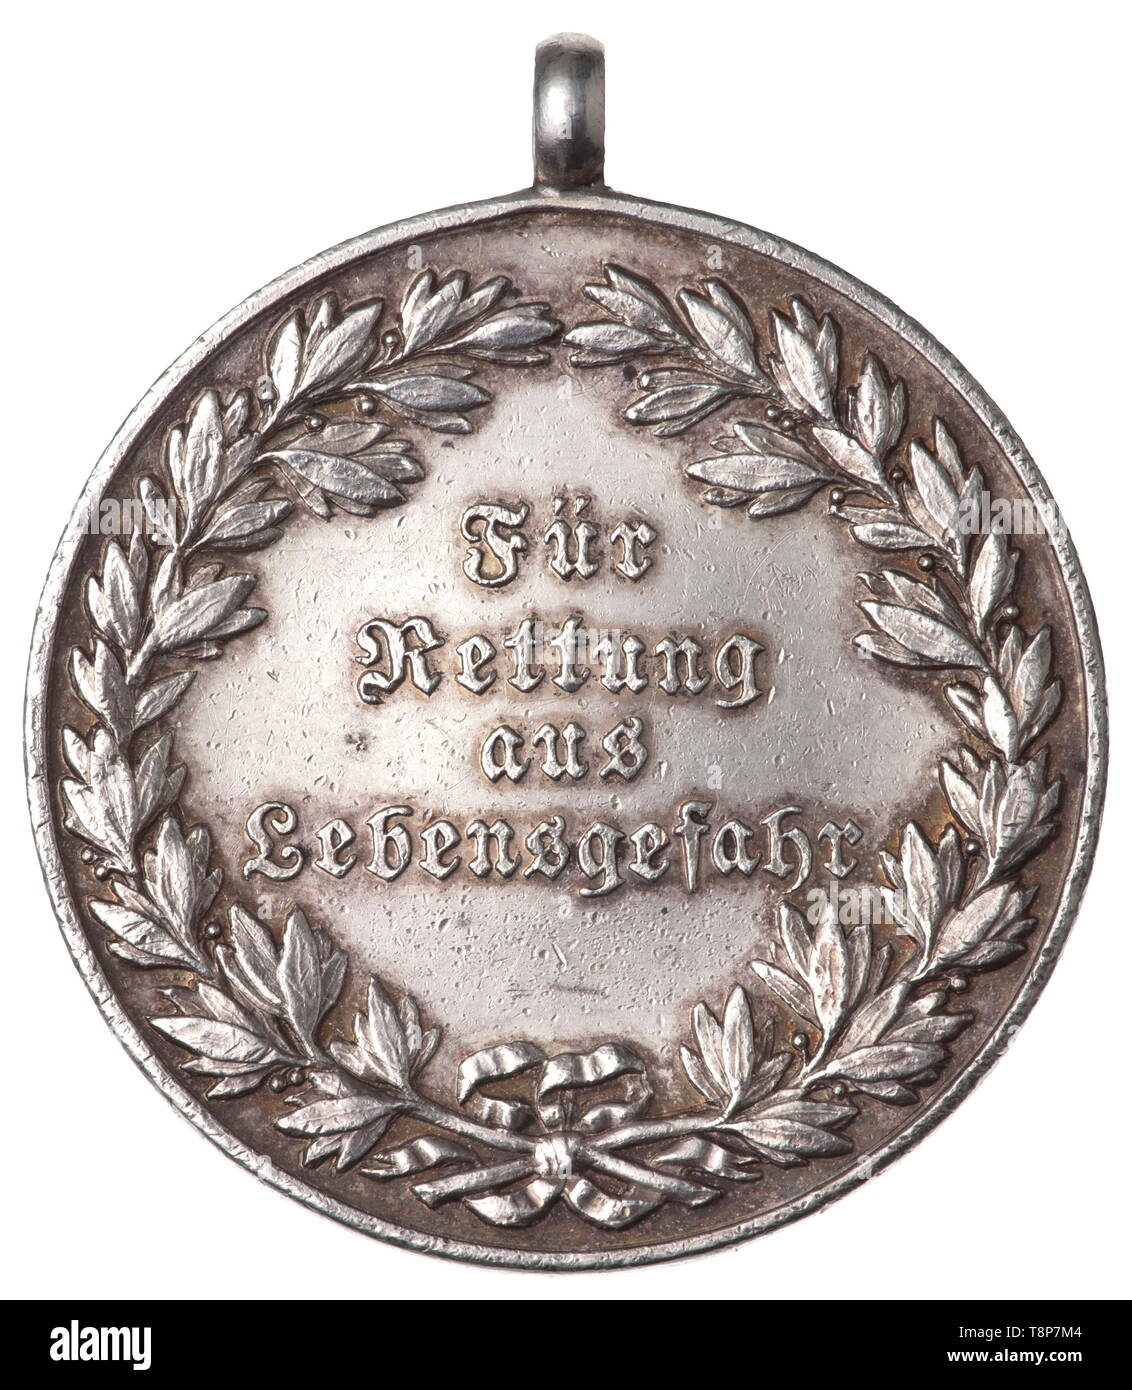 A lifesaving medal - model 1931 Silver medal with objective inscription (tr.) 'For Rescue from Mortal Danger' in German lettering on the obverse and the old Bavarian state coat of arms of 1923 on the reverse. Edge bumps, bored, diameter 41.5 mm. Weight 30.1 g. After the end of the monarchy in Bavaria, from 1920 the lifesaving medal instituted in 1889 with the likeness of Prince Regent Luitpold continued to be awarded. On 14 December 1931 a new republican model was introduced and was bestowed until 8 April 1934, when from that point in time the Re, Additional-Rights-Clearance-Info-Not-Available Stock Photo